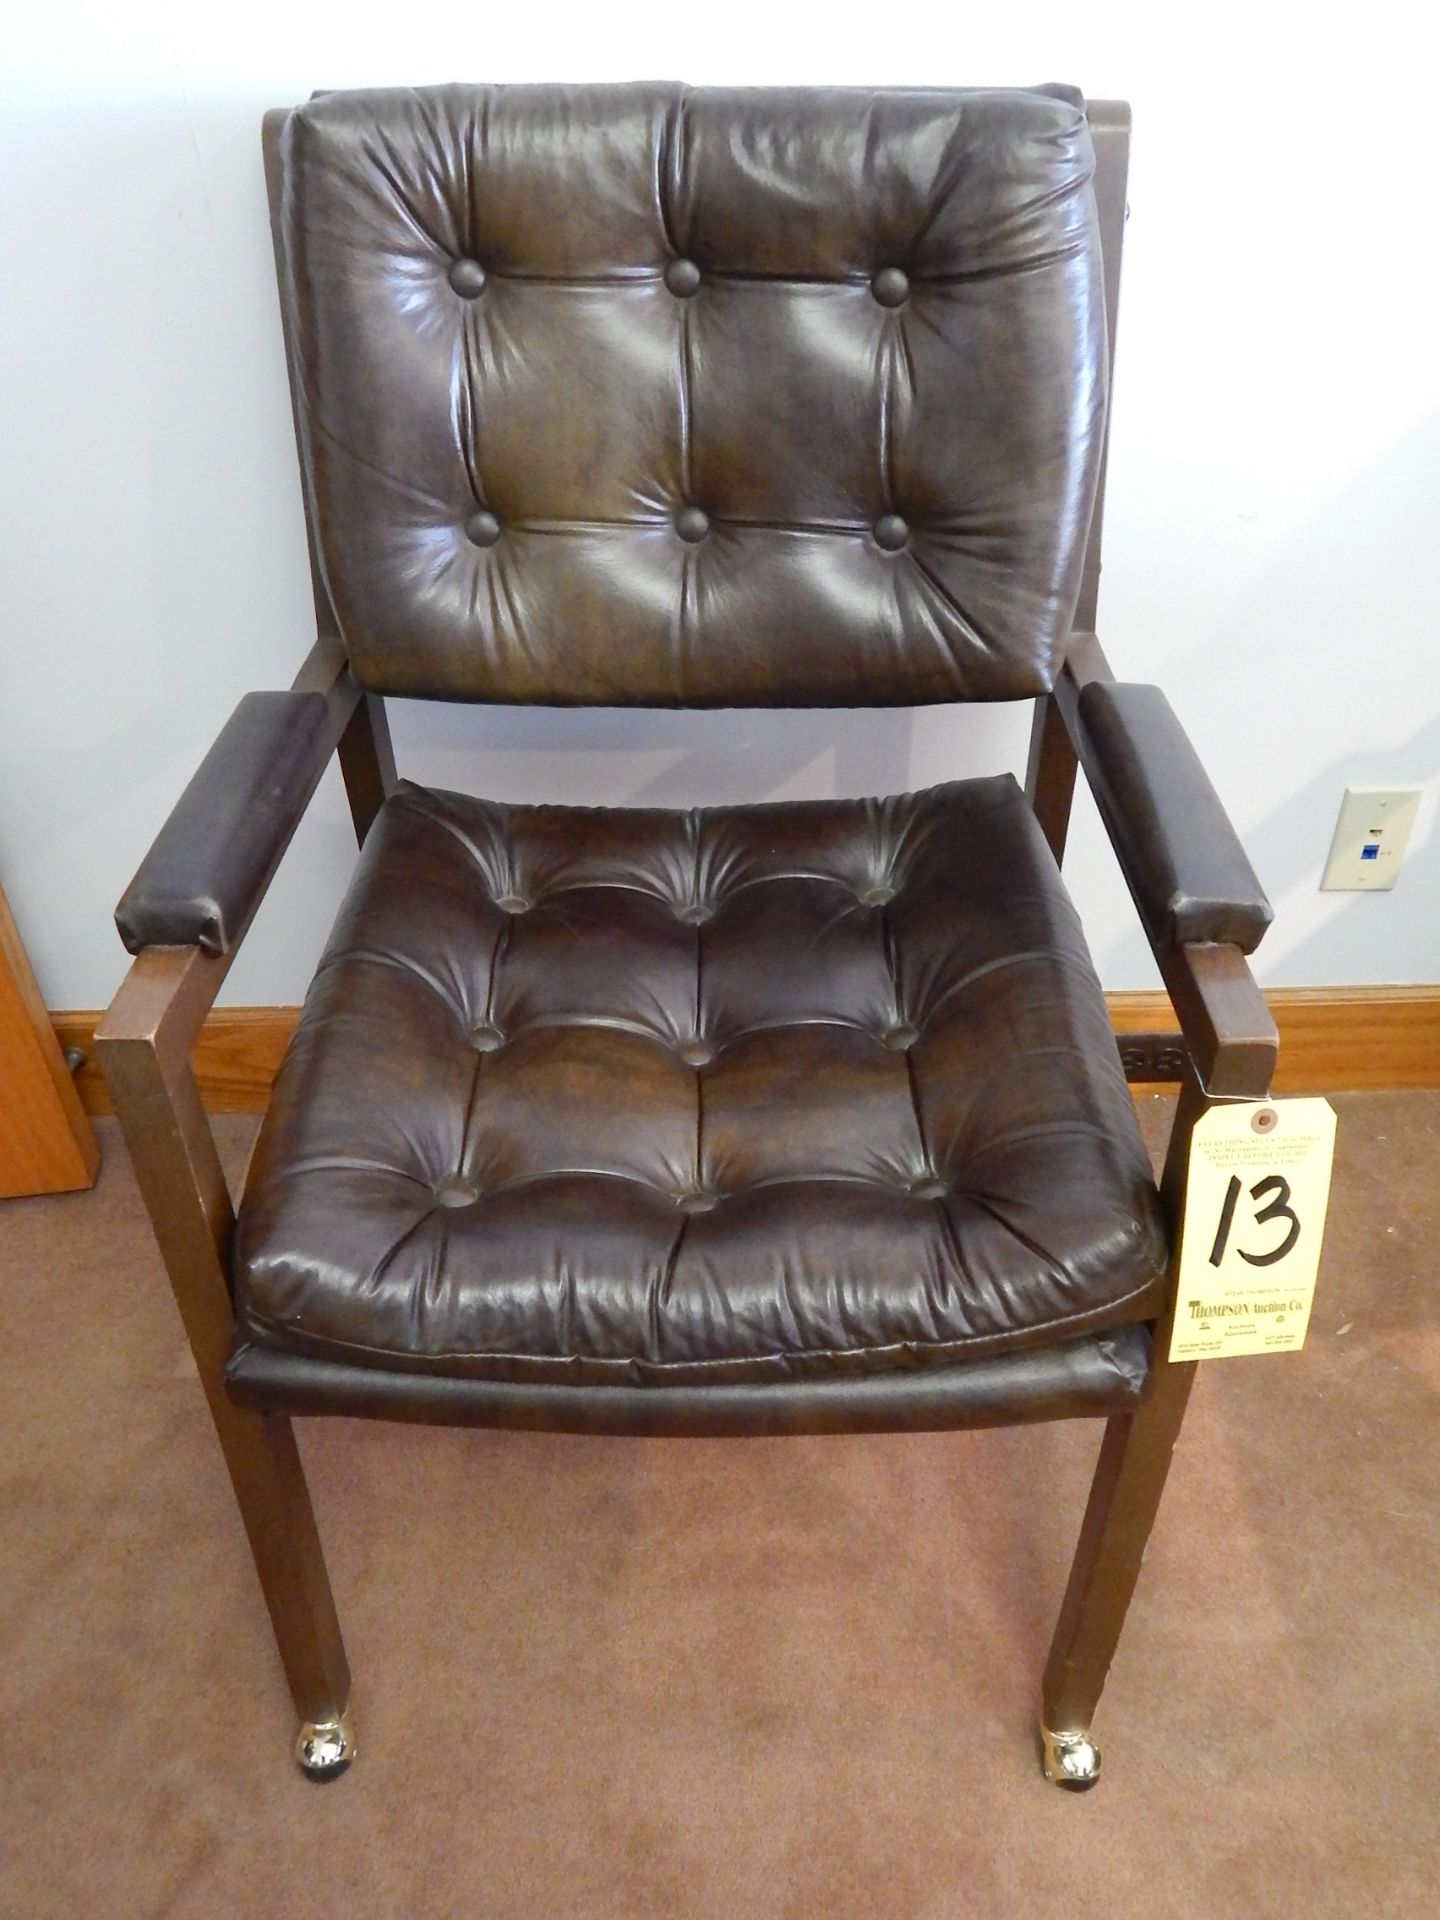 Arm Chair with Leather Seat & Back on Castors